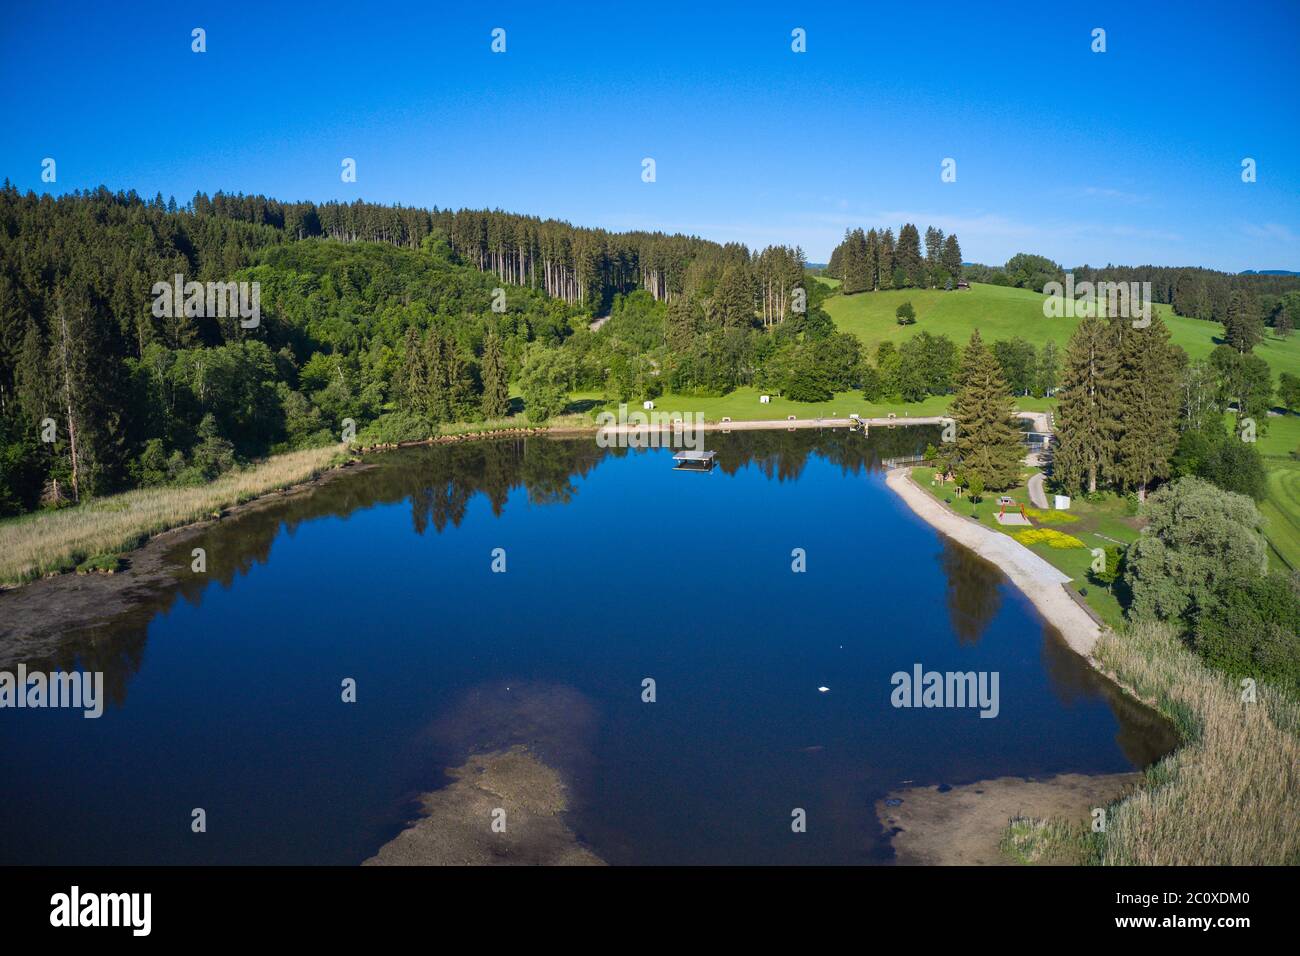 Marktoberdorf, Germany, 12th June 2020  Ettwieser Weiher, a small lake for relax and swimming. © Peter Schatz / Alamy Stock Photos Stock Photo